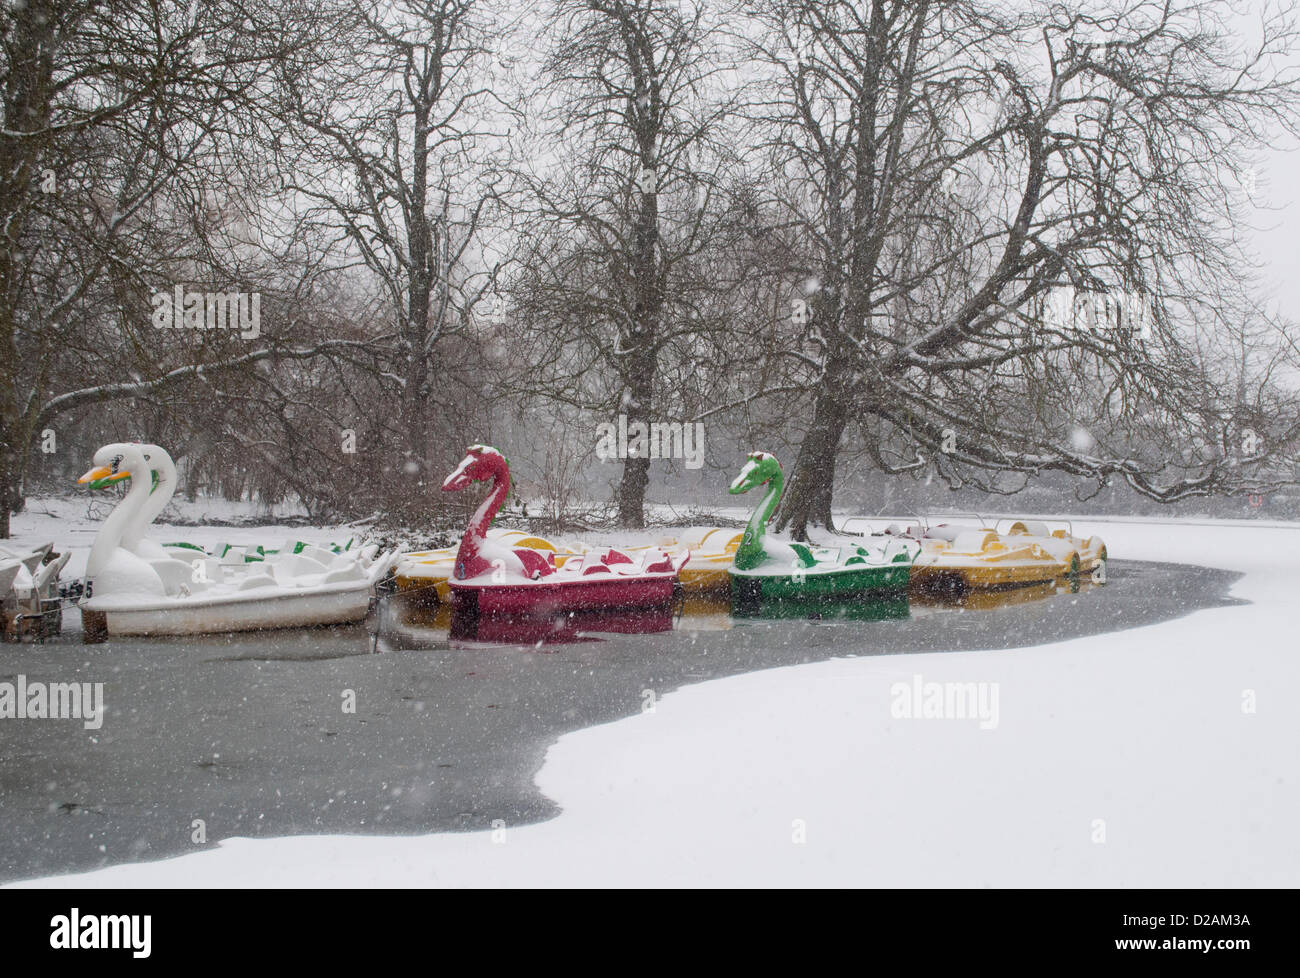 18/01/2013, Alexandra Palace, London UK. Pleasure boats look surreal as heavy snow falls on the frozen boating lake in the grounds of Alexandra Palace, north London. Stock Photo